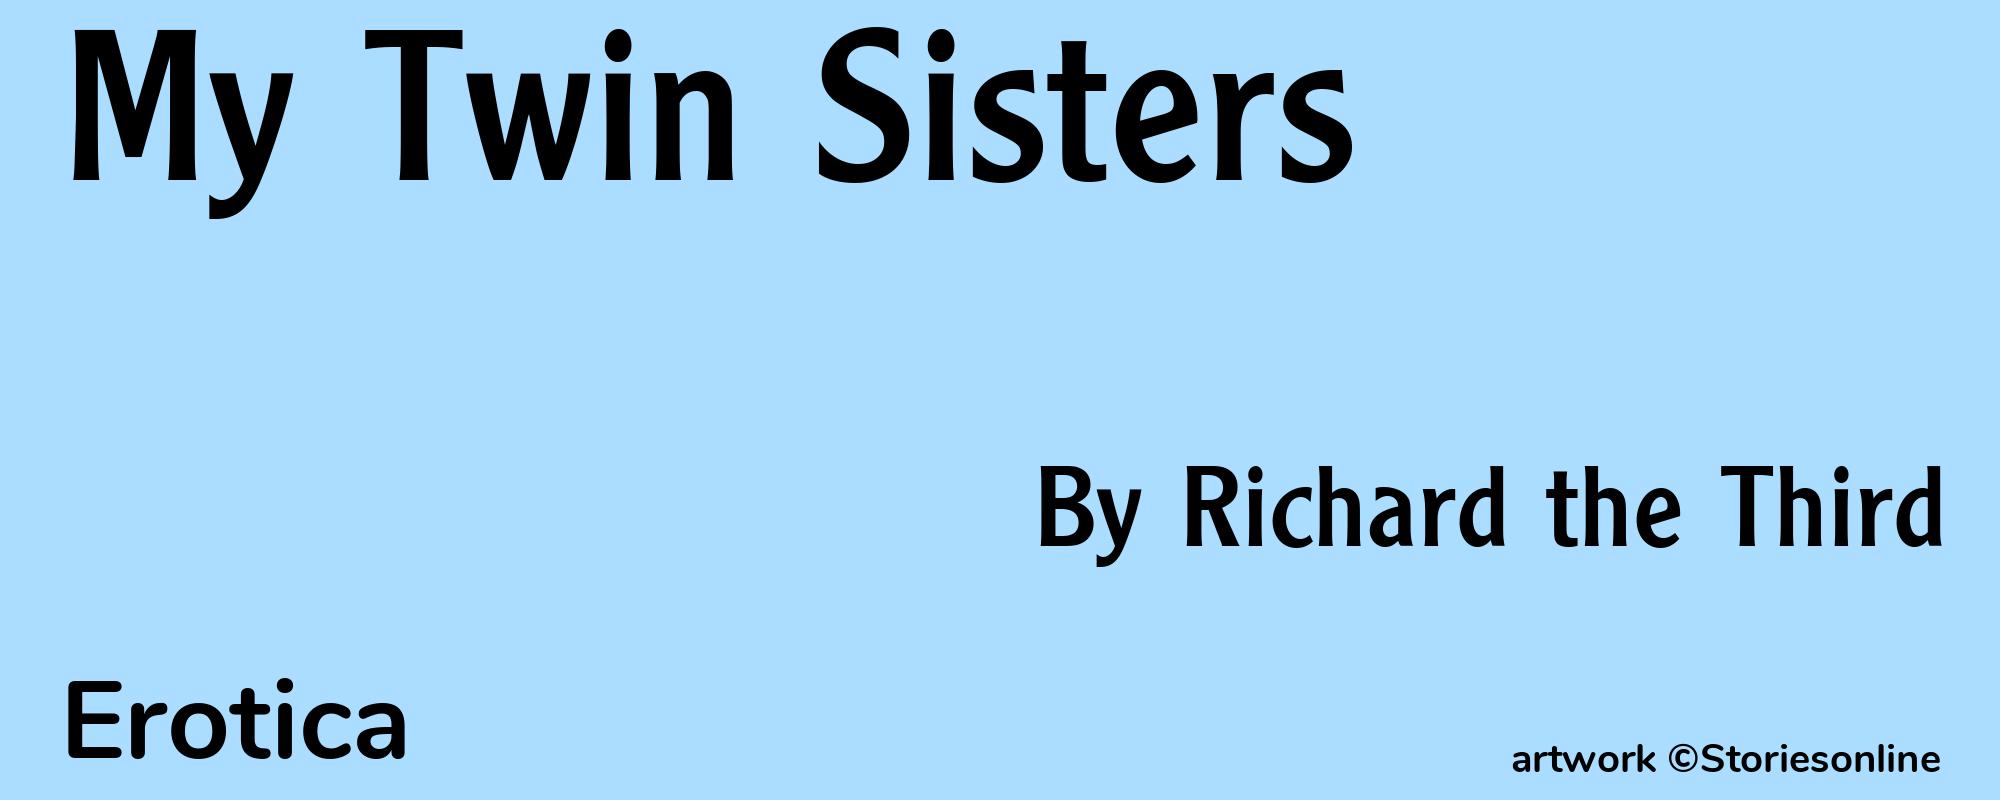 My Twin Sisters - Cover